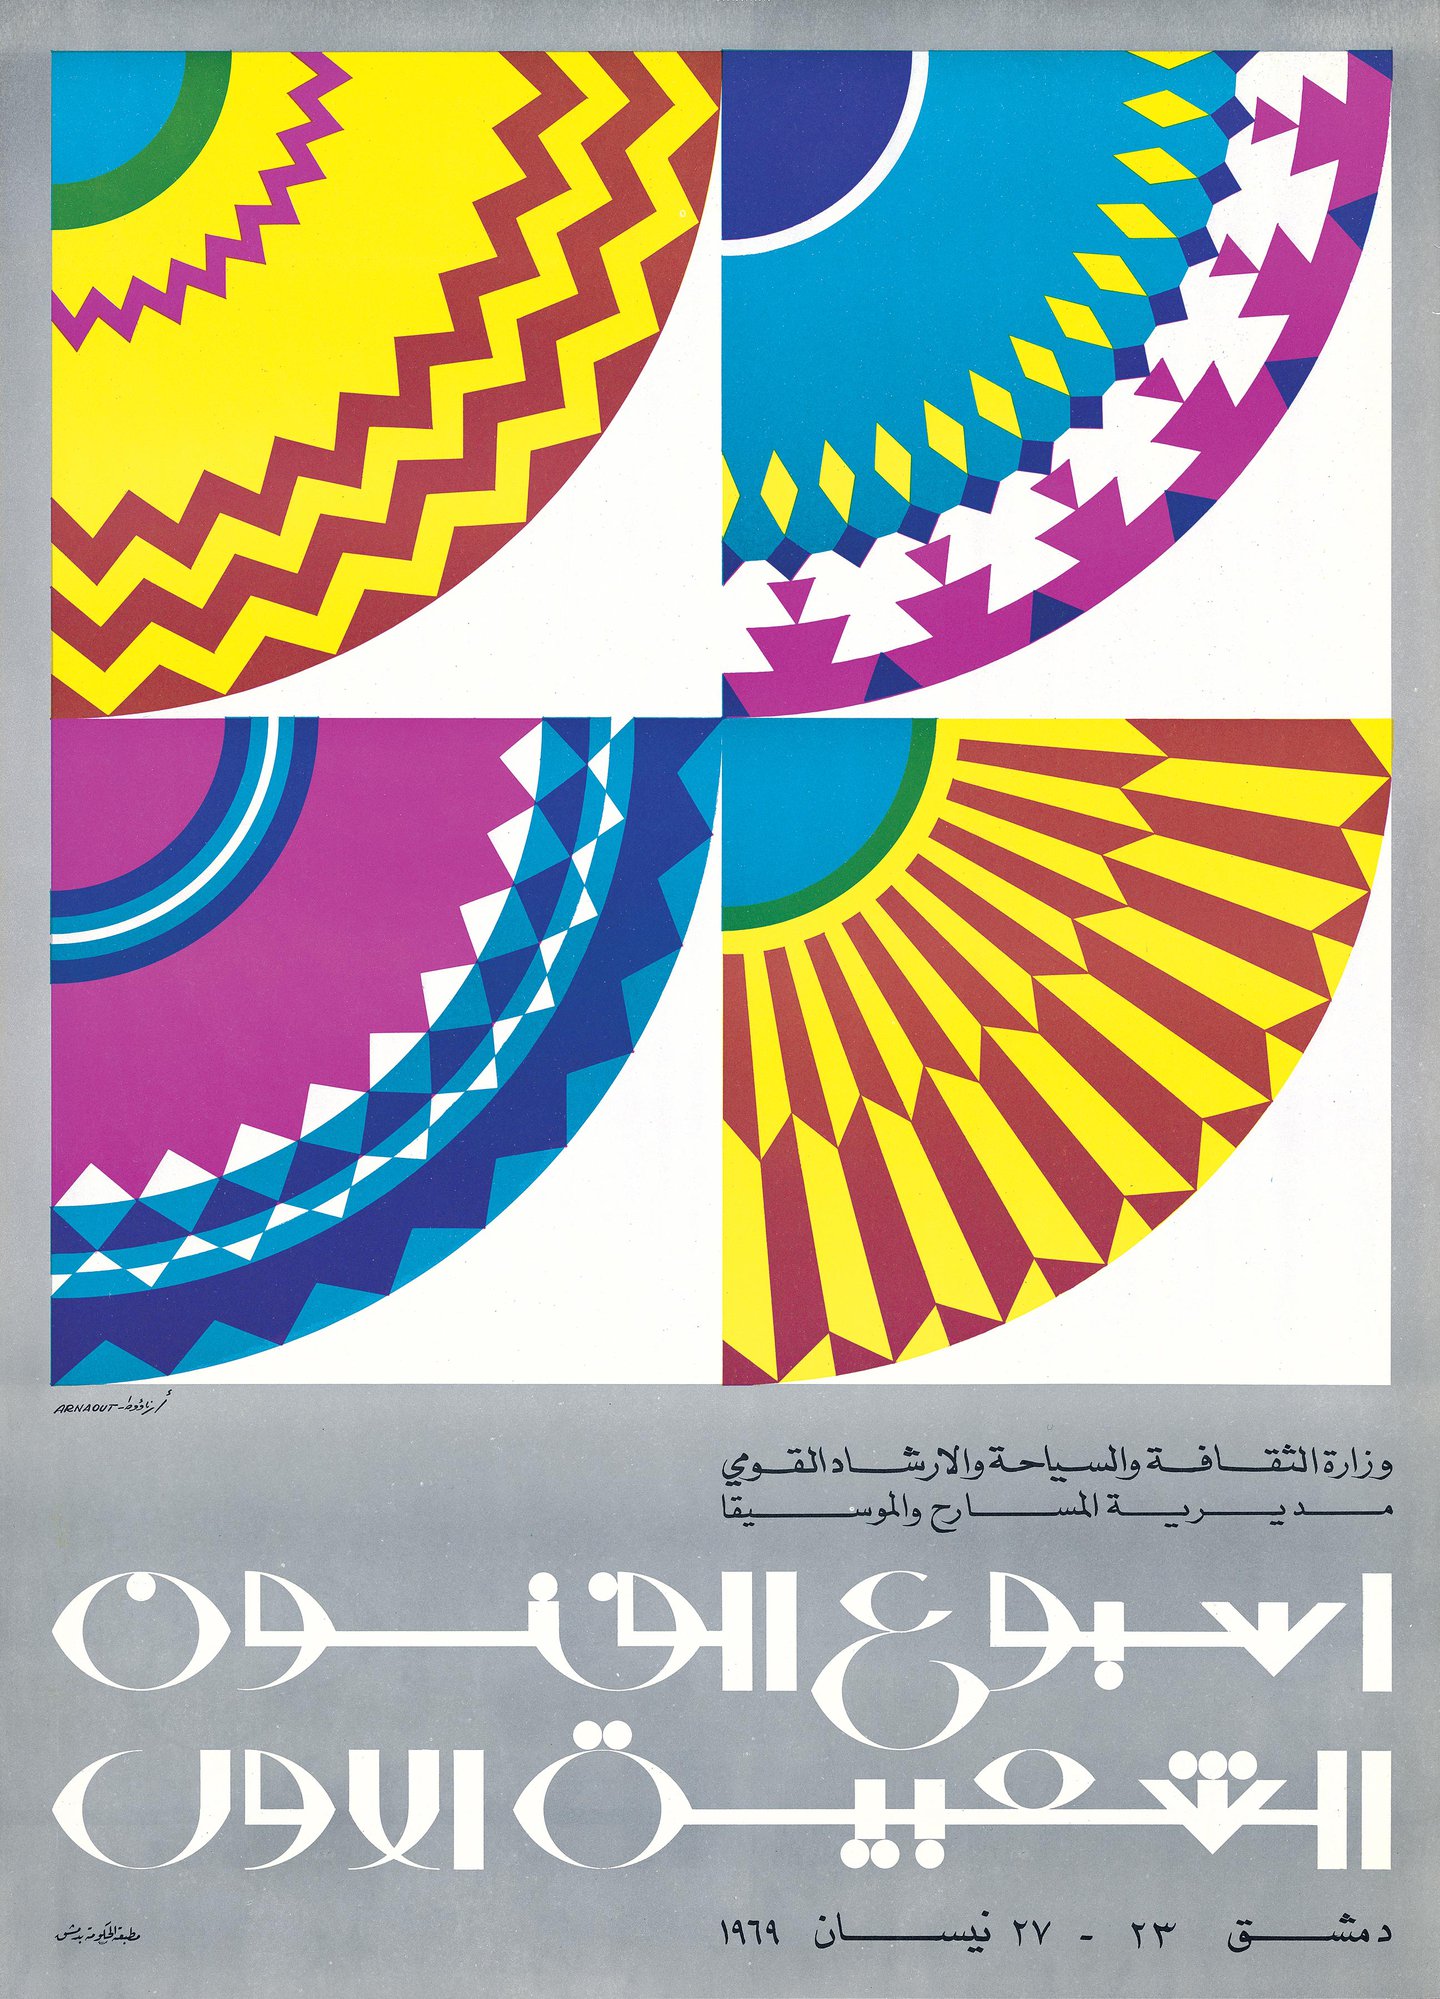 syrian-print-archive-features-graphic-design-.width-1440_29DYNyvoy7lMc2Aa